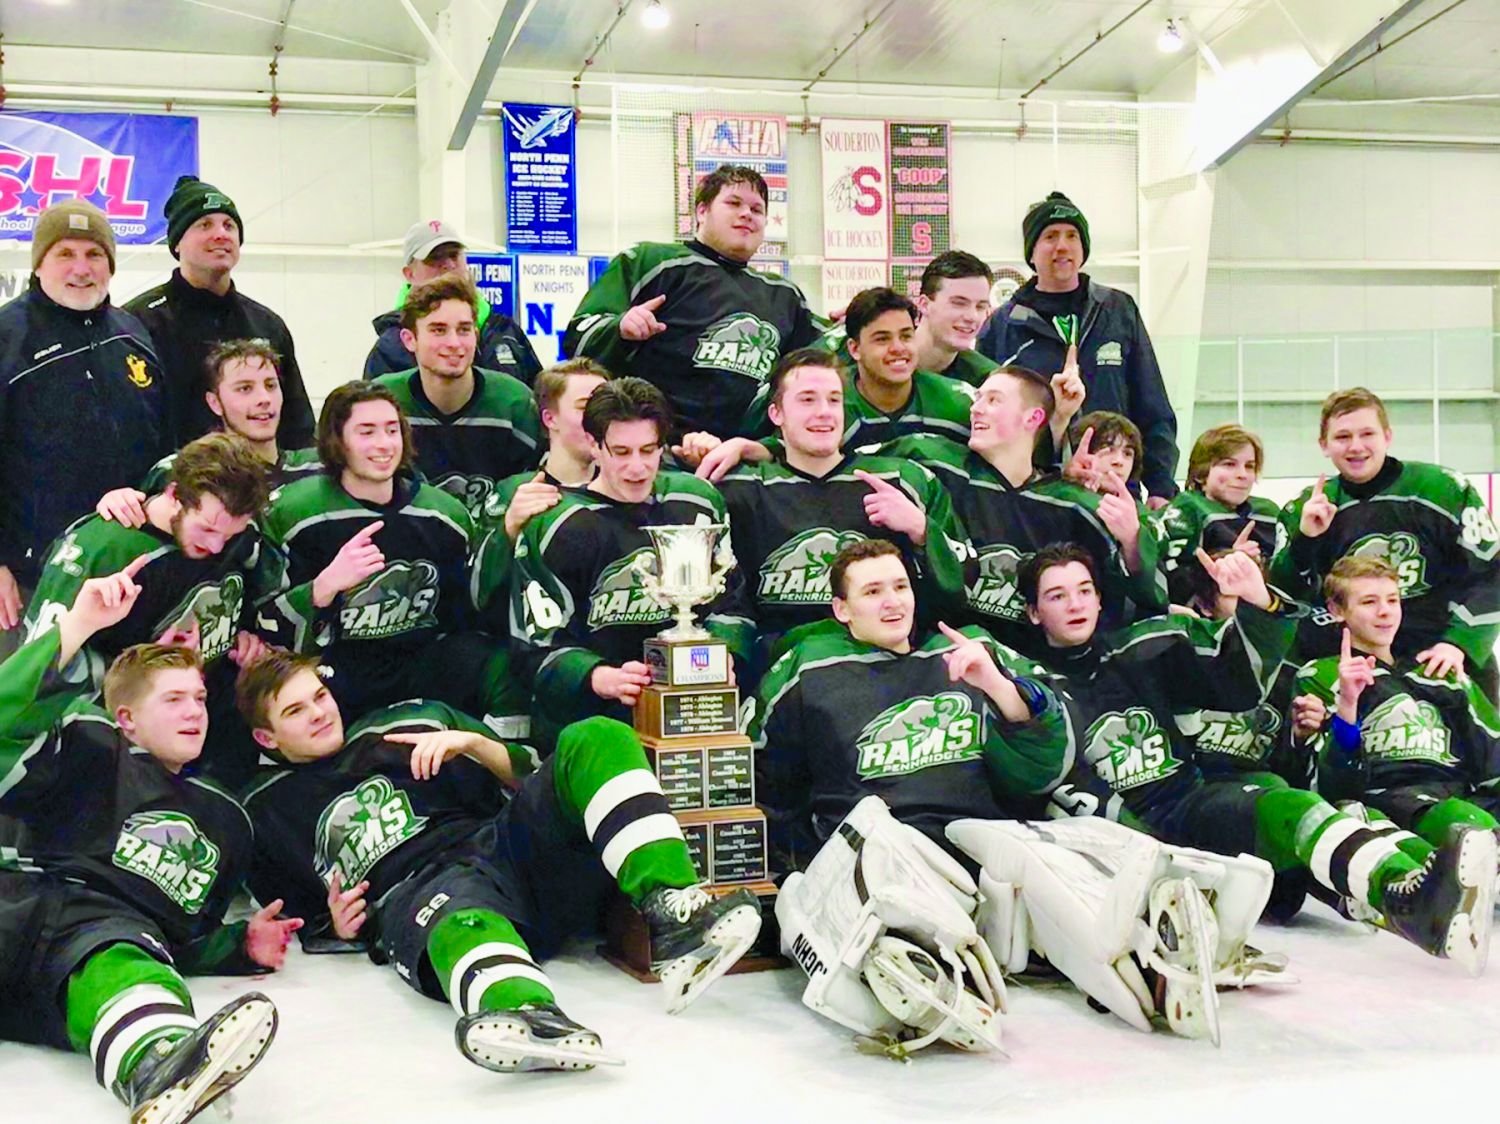 Pennridge players pose with the Suburban High School Hockey League trophy after winning their first league title in 11 seasons.